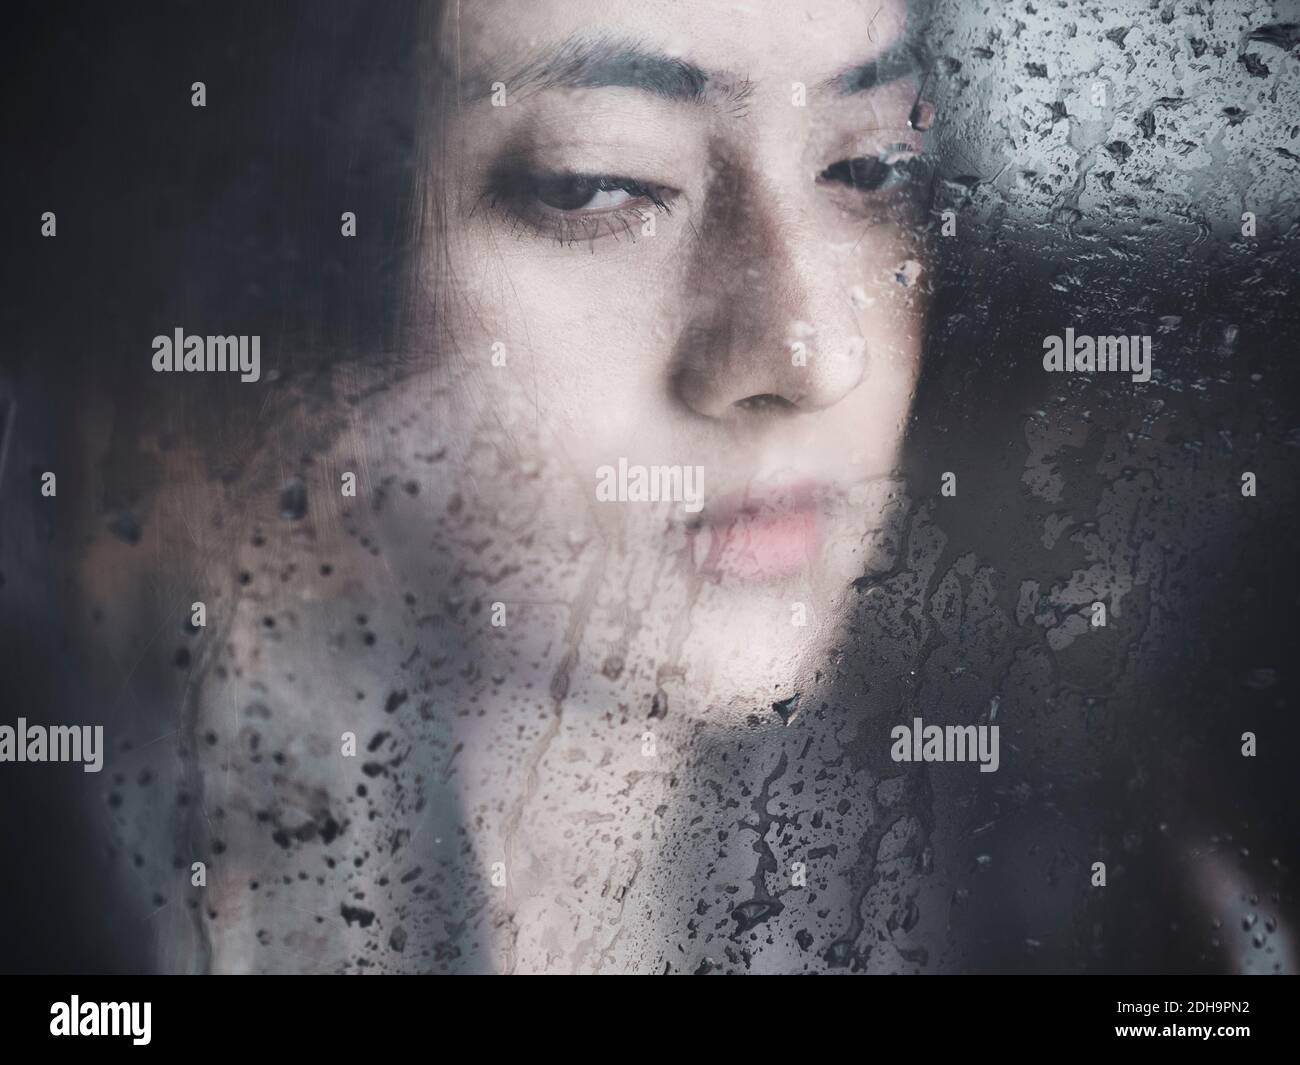 Pensive young Nepalese woman behind wet glass Stock Photo